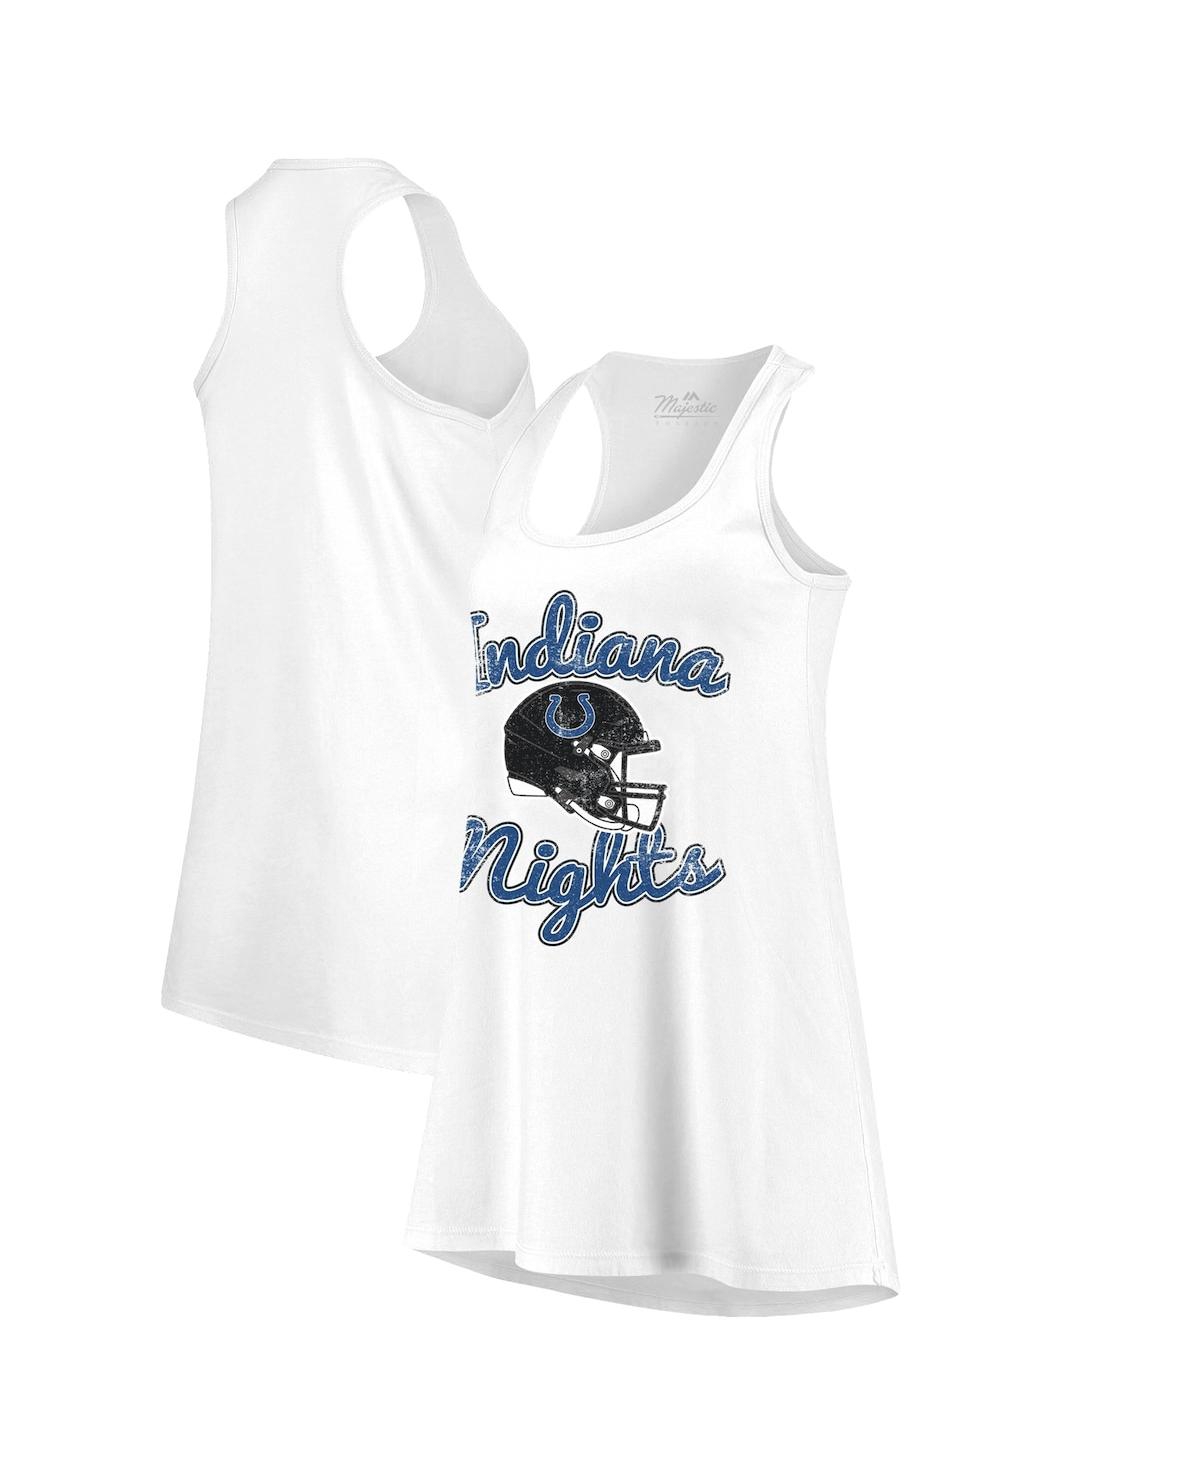 Women's Majestic Threads White Indianapolis Colts Indiana Nights Alternate Racerback Tank Top - White